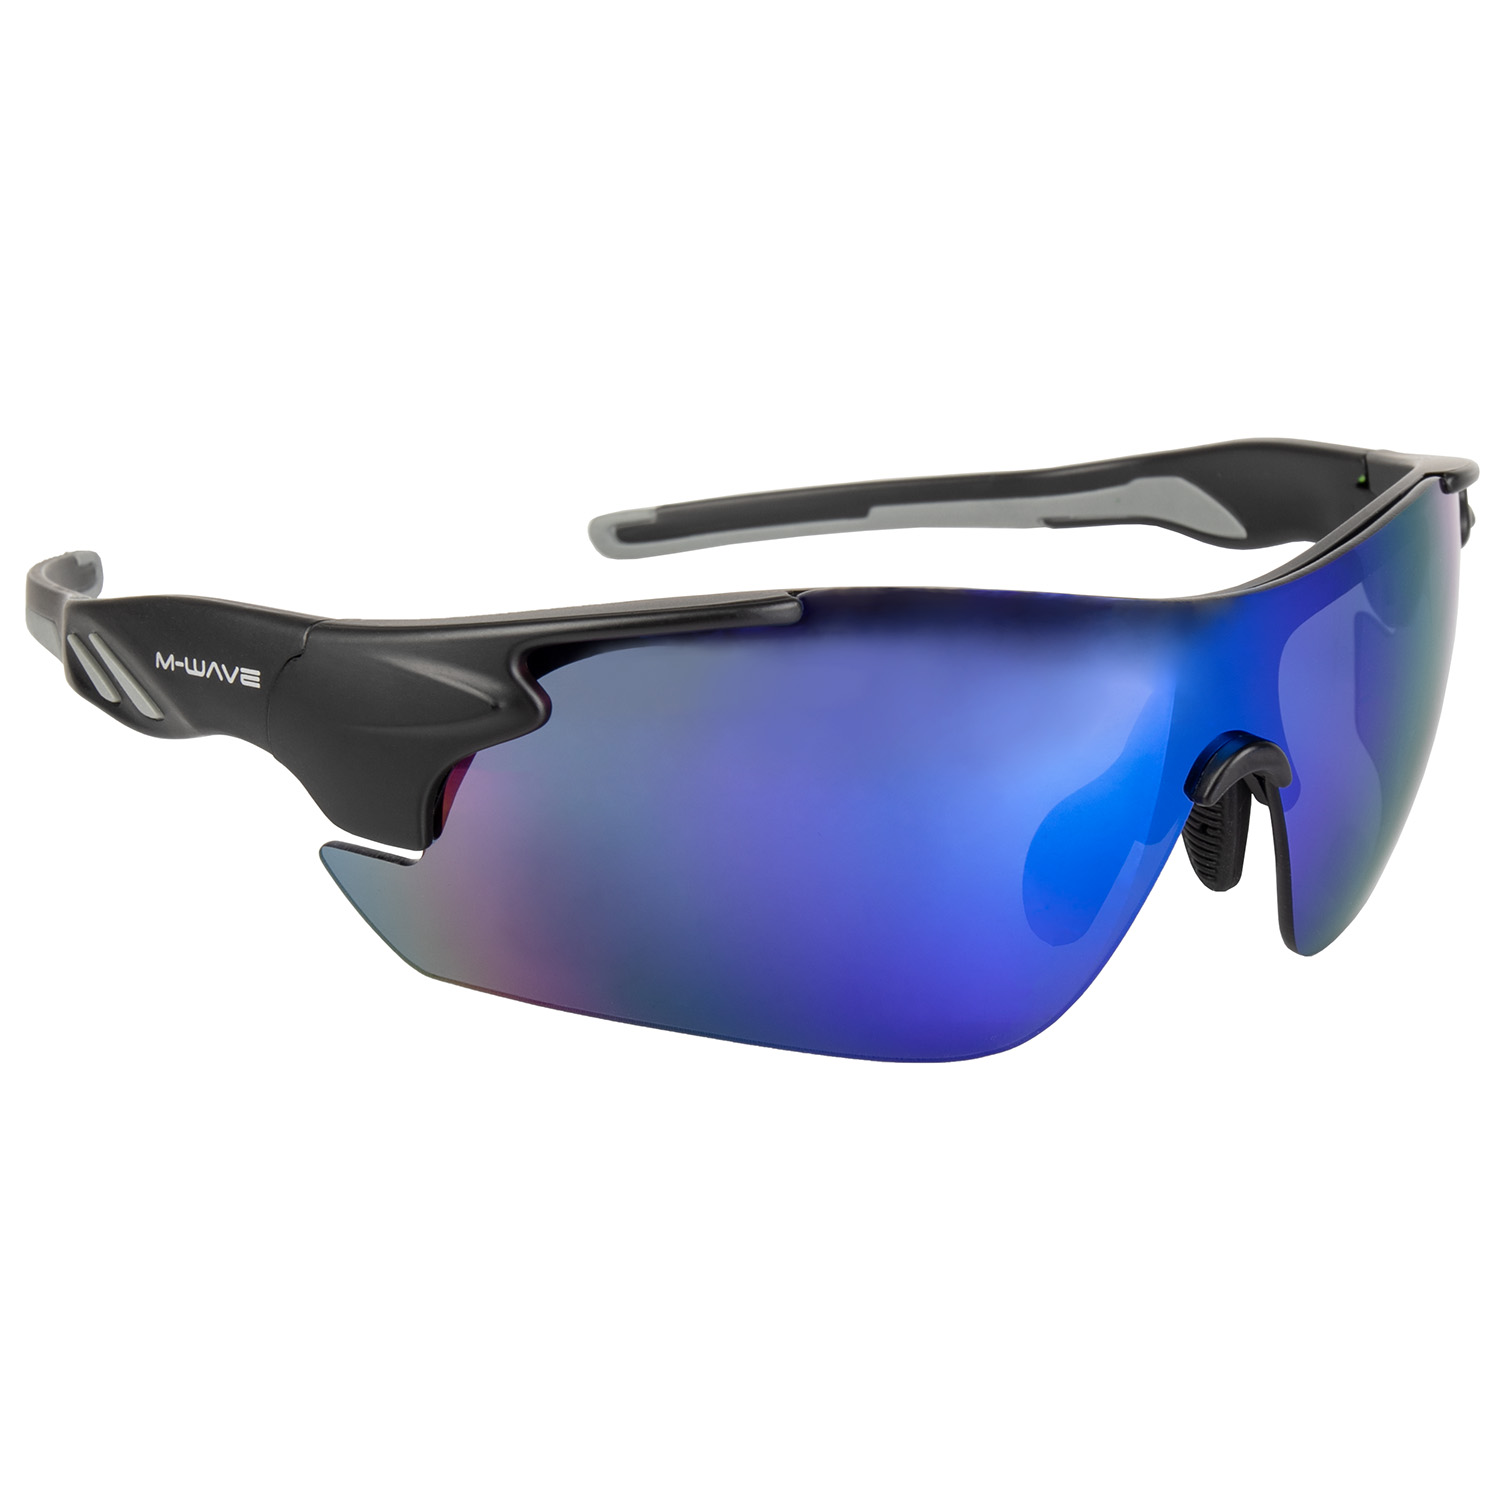 710160 M-WAVE Rayon G4 sports/bike eyewear – AVAILABLE IN SELECTED BIKE SHOPS